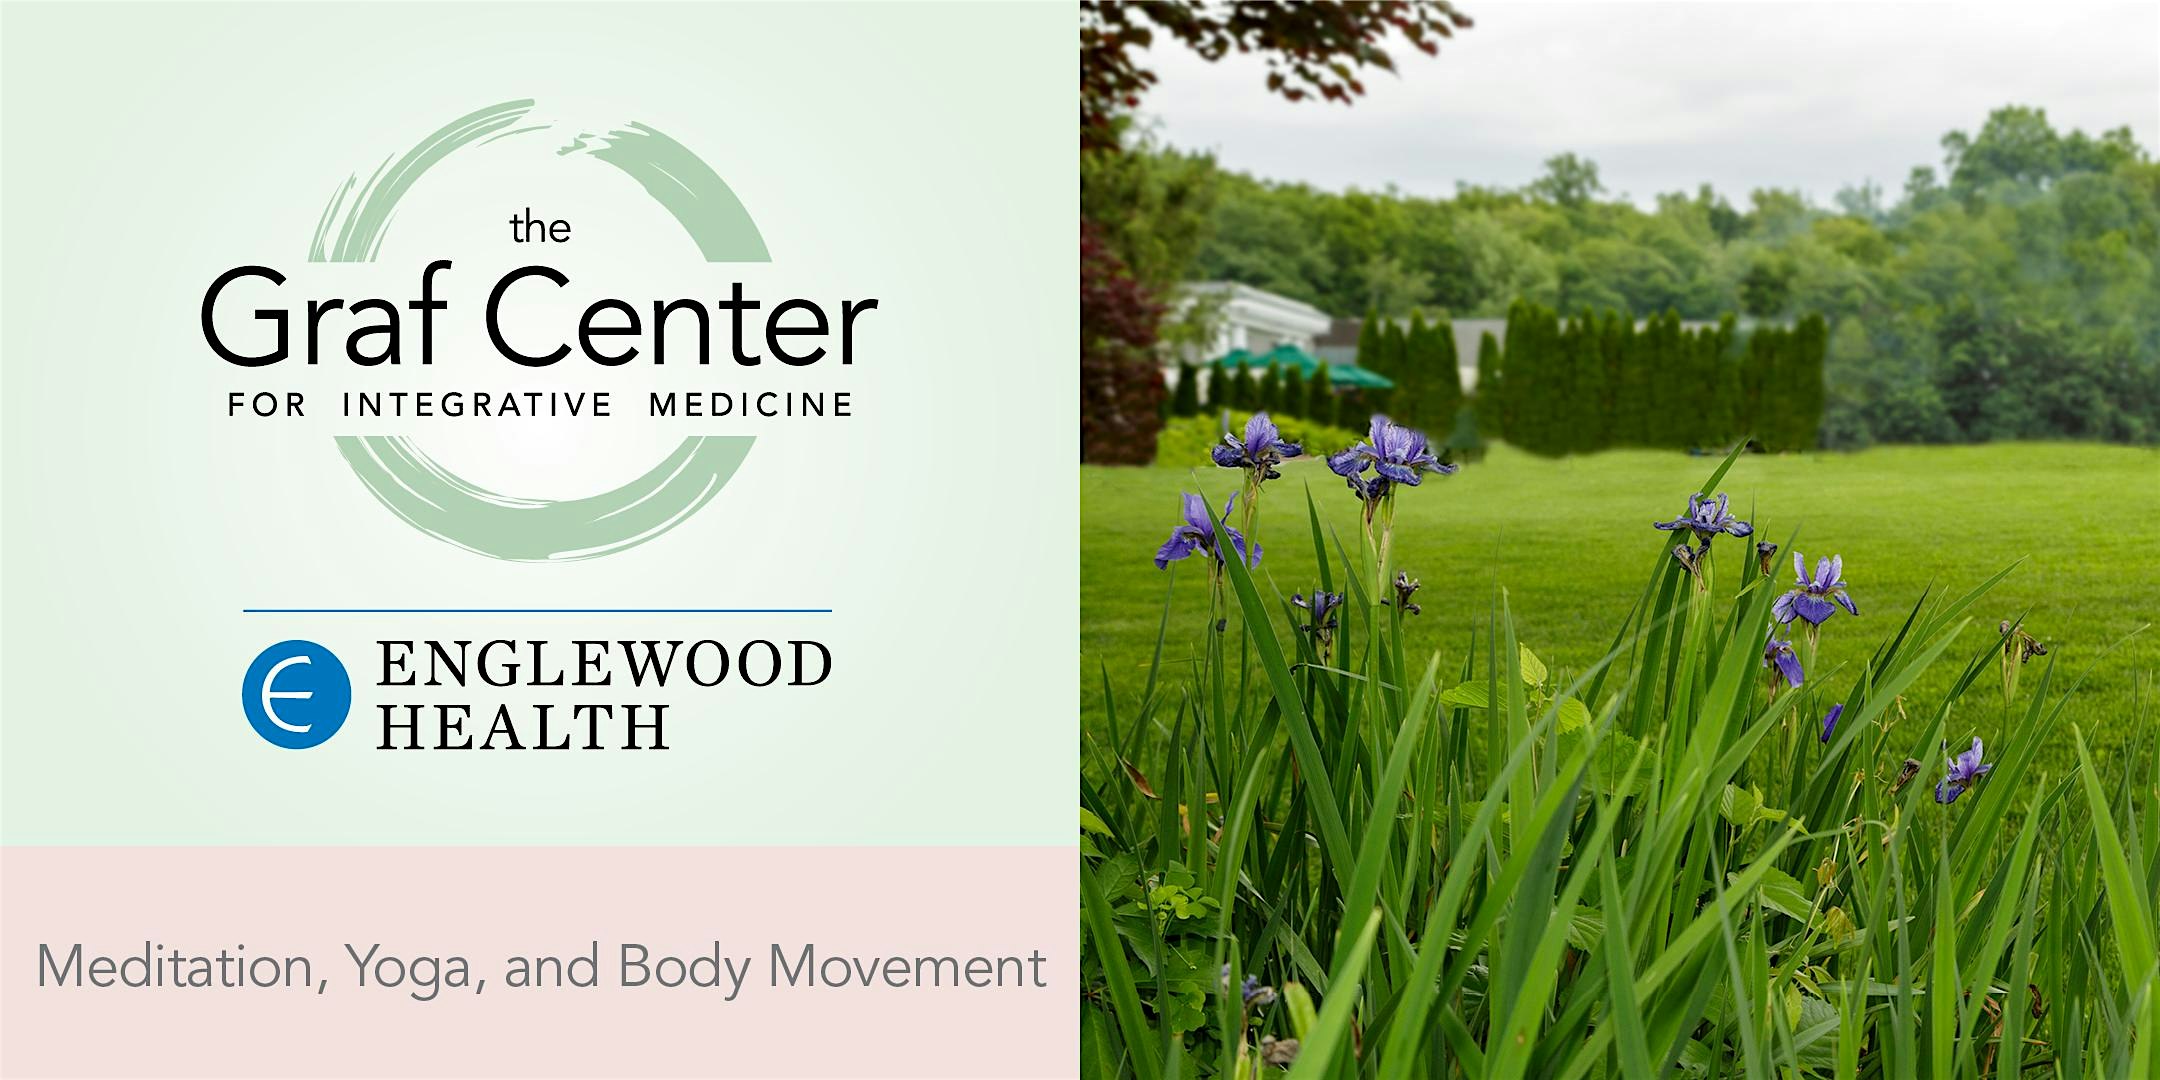 More info: Meditation and Yoga on the Lawn - Sundays